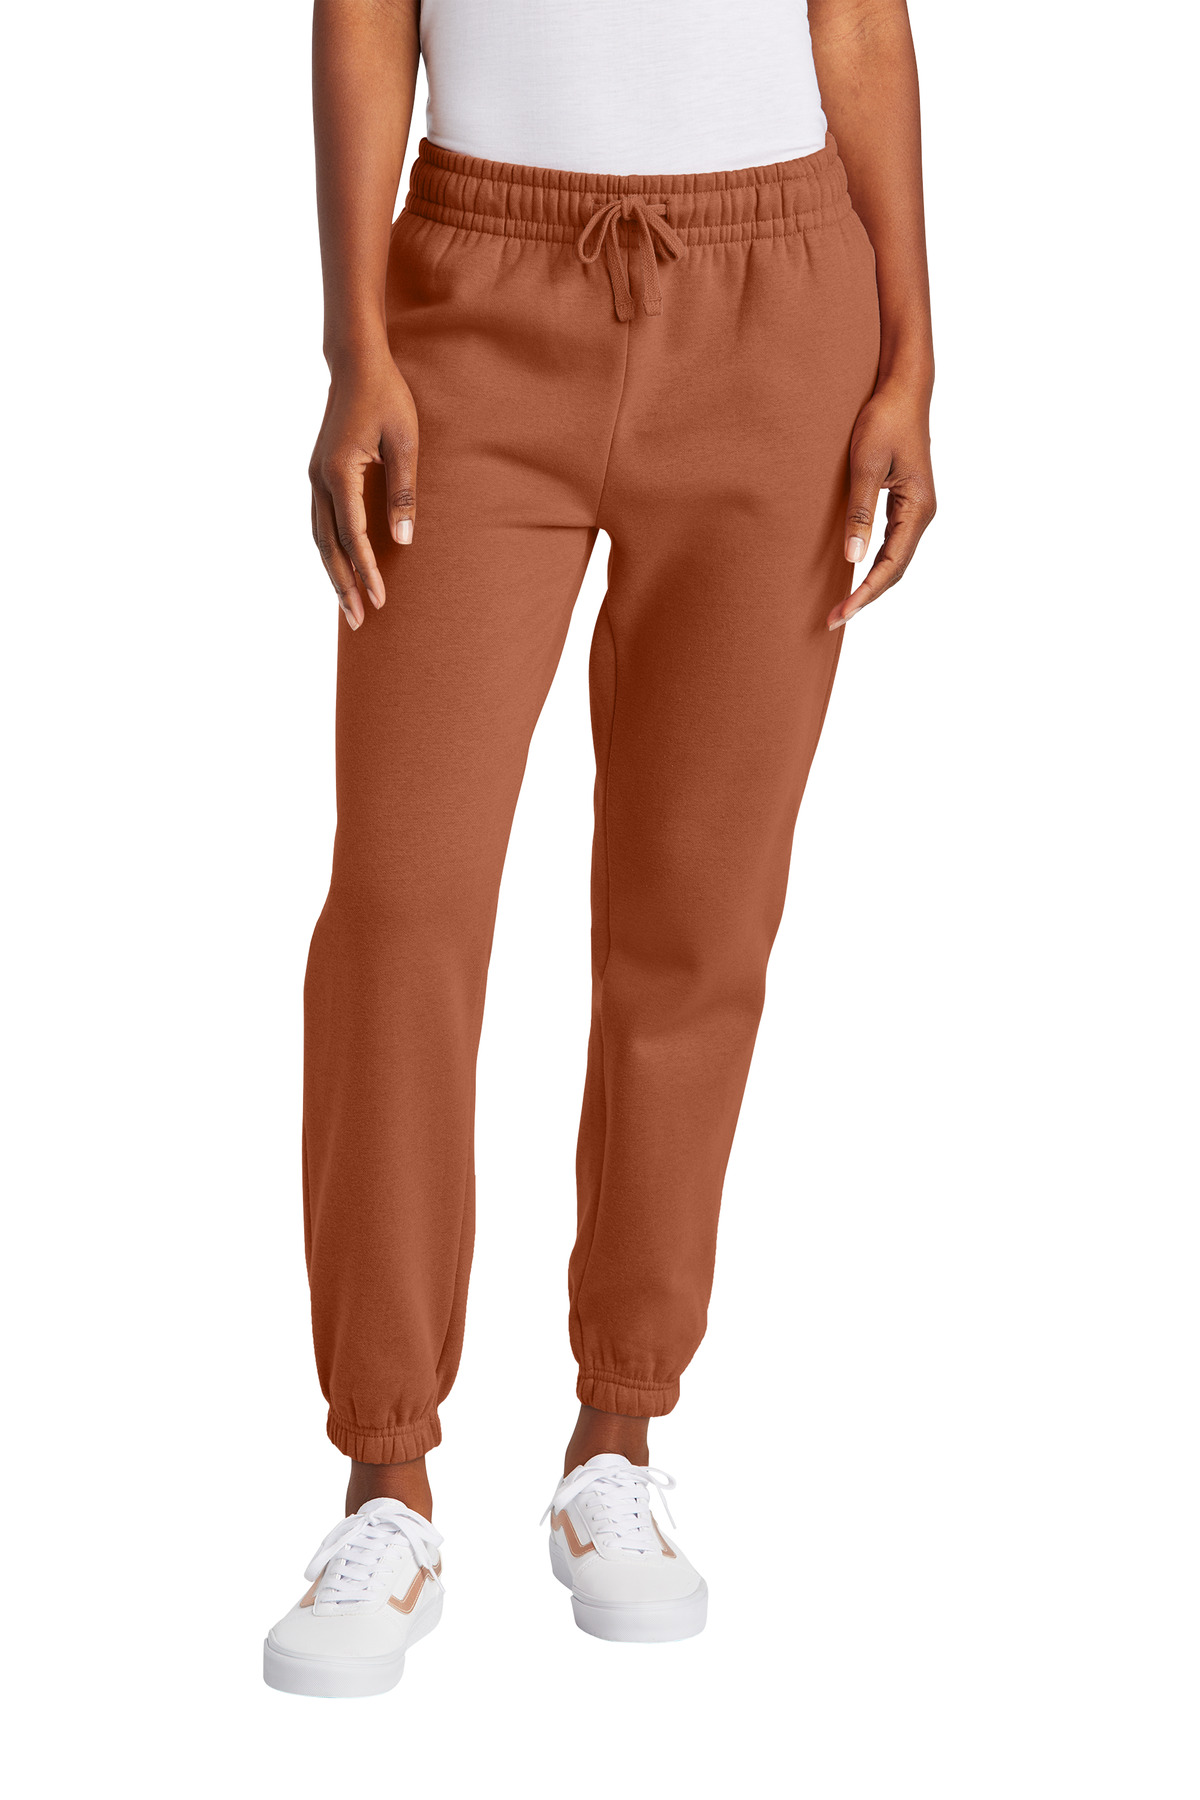 District DT6110 Womens V.I.T. Fleece Sweatpant With Pockets